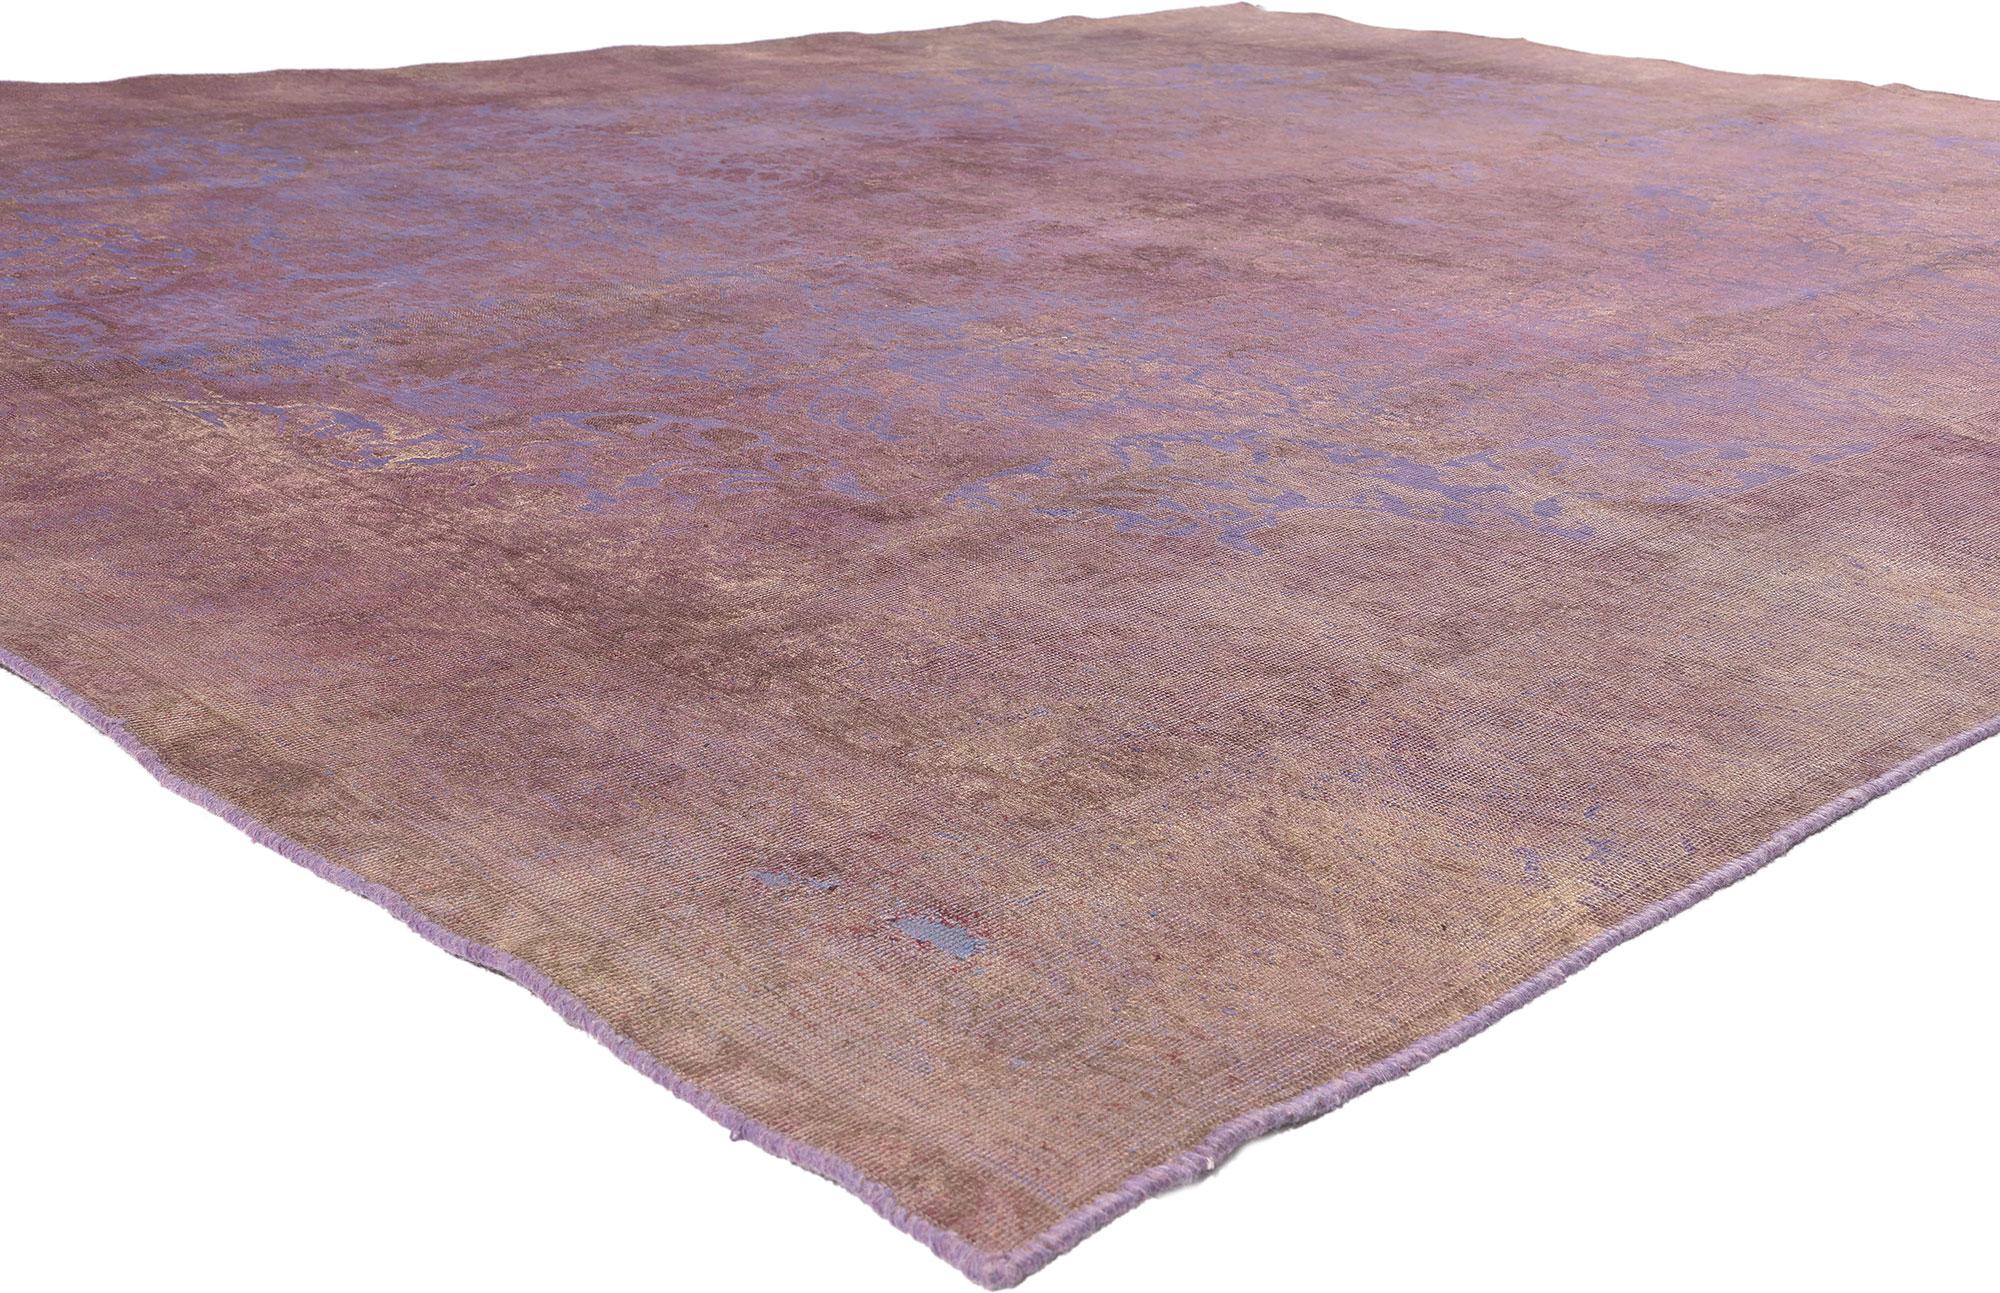 60613 Vintage Turkish Overdyed Rug, 09'08 x 12'05. 
Discover romantic industrial style in this hand knotted wool vintage Turkish overdyed rug. The beguiling botanical design and feminine color palette in this piece work together resulting in a chic